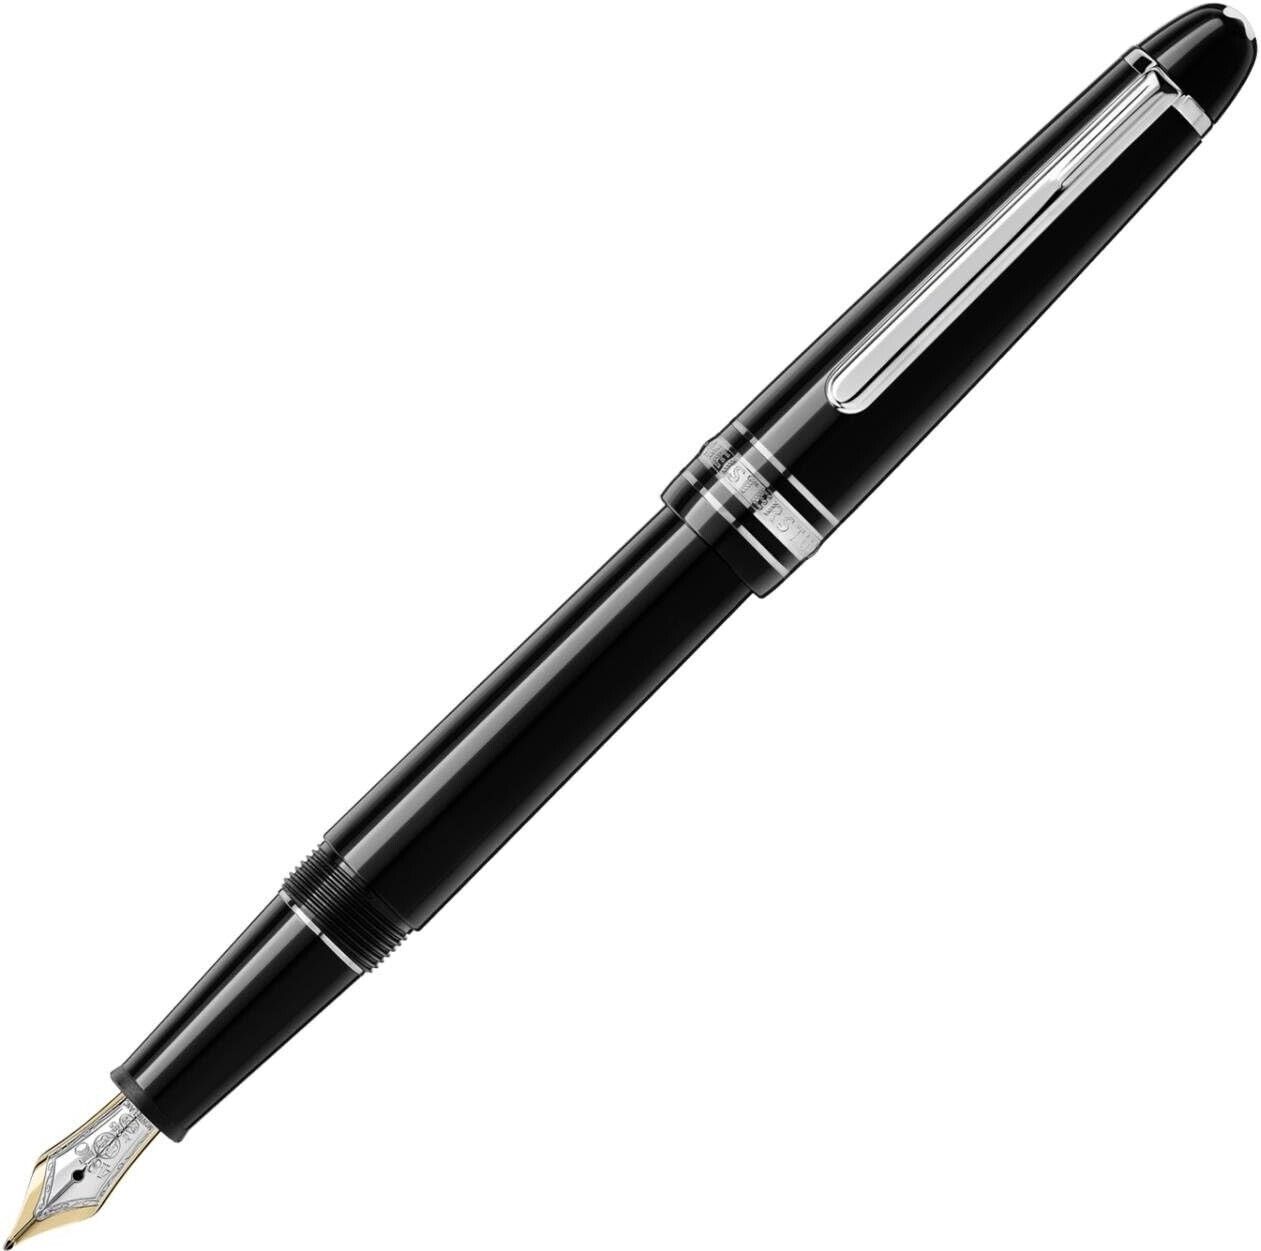 New Authentic Montblanc Meisterstuck Platinum  Fountain Pen F Black Friday Deal